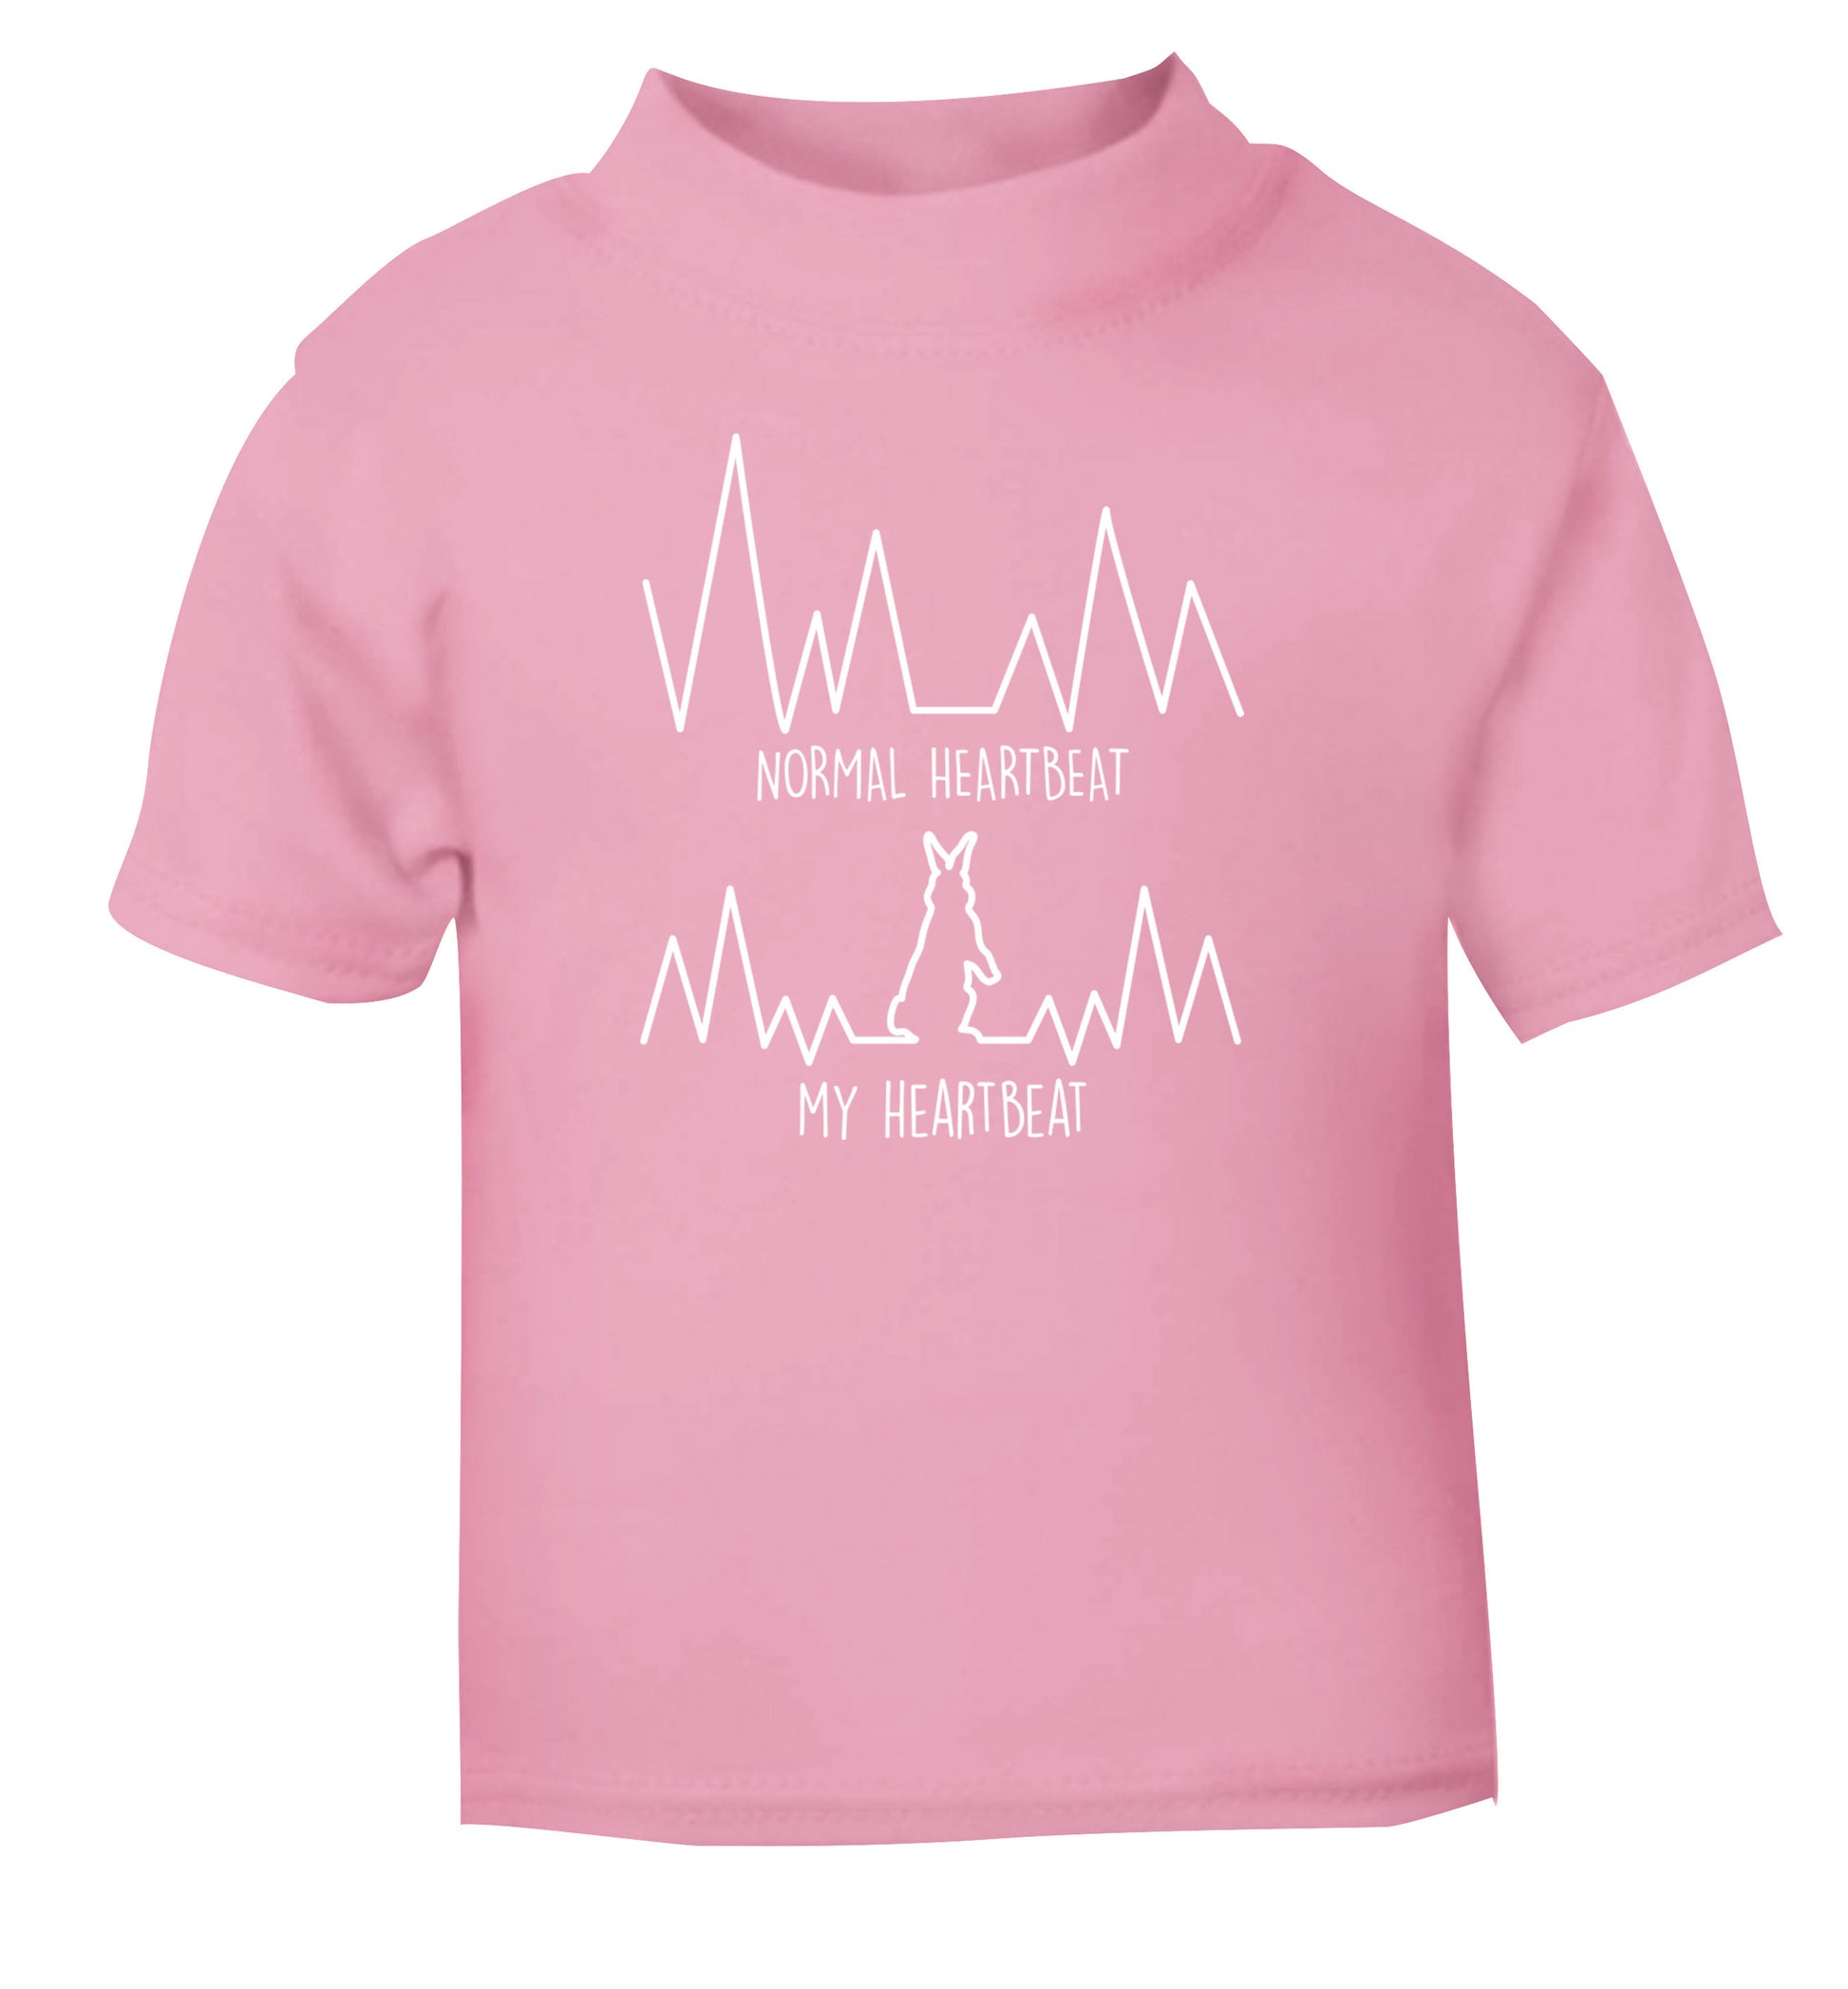 Normal heartbeat, my heartbeat rabbit lover light pink Baby Toddler Tshirt 2 Years